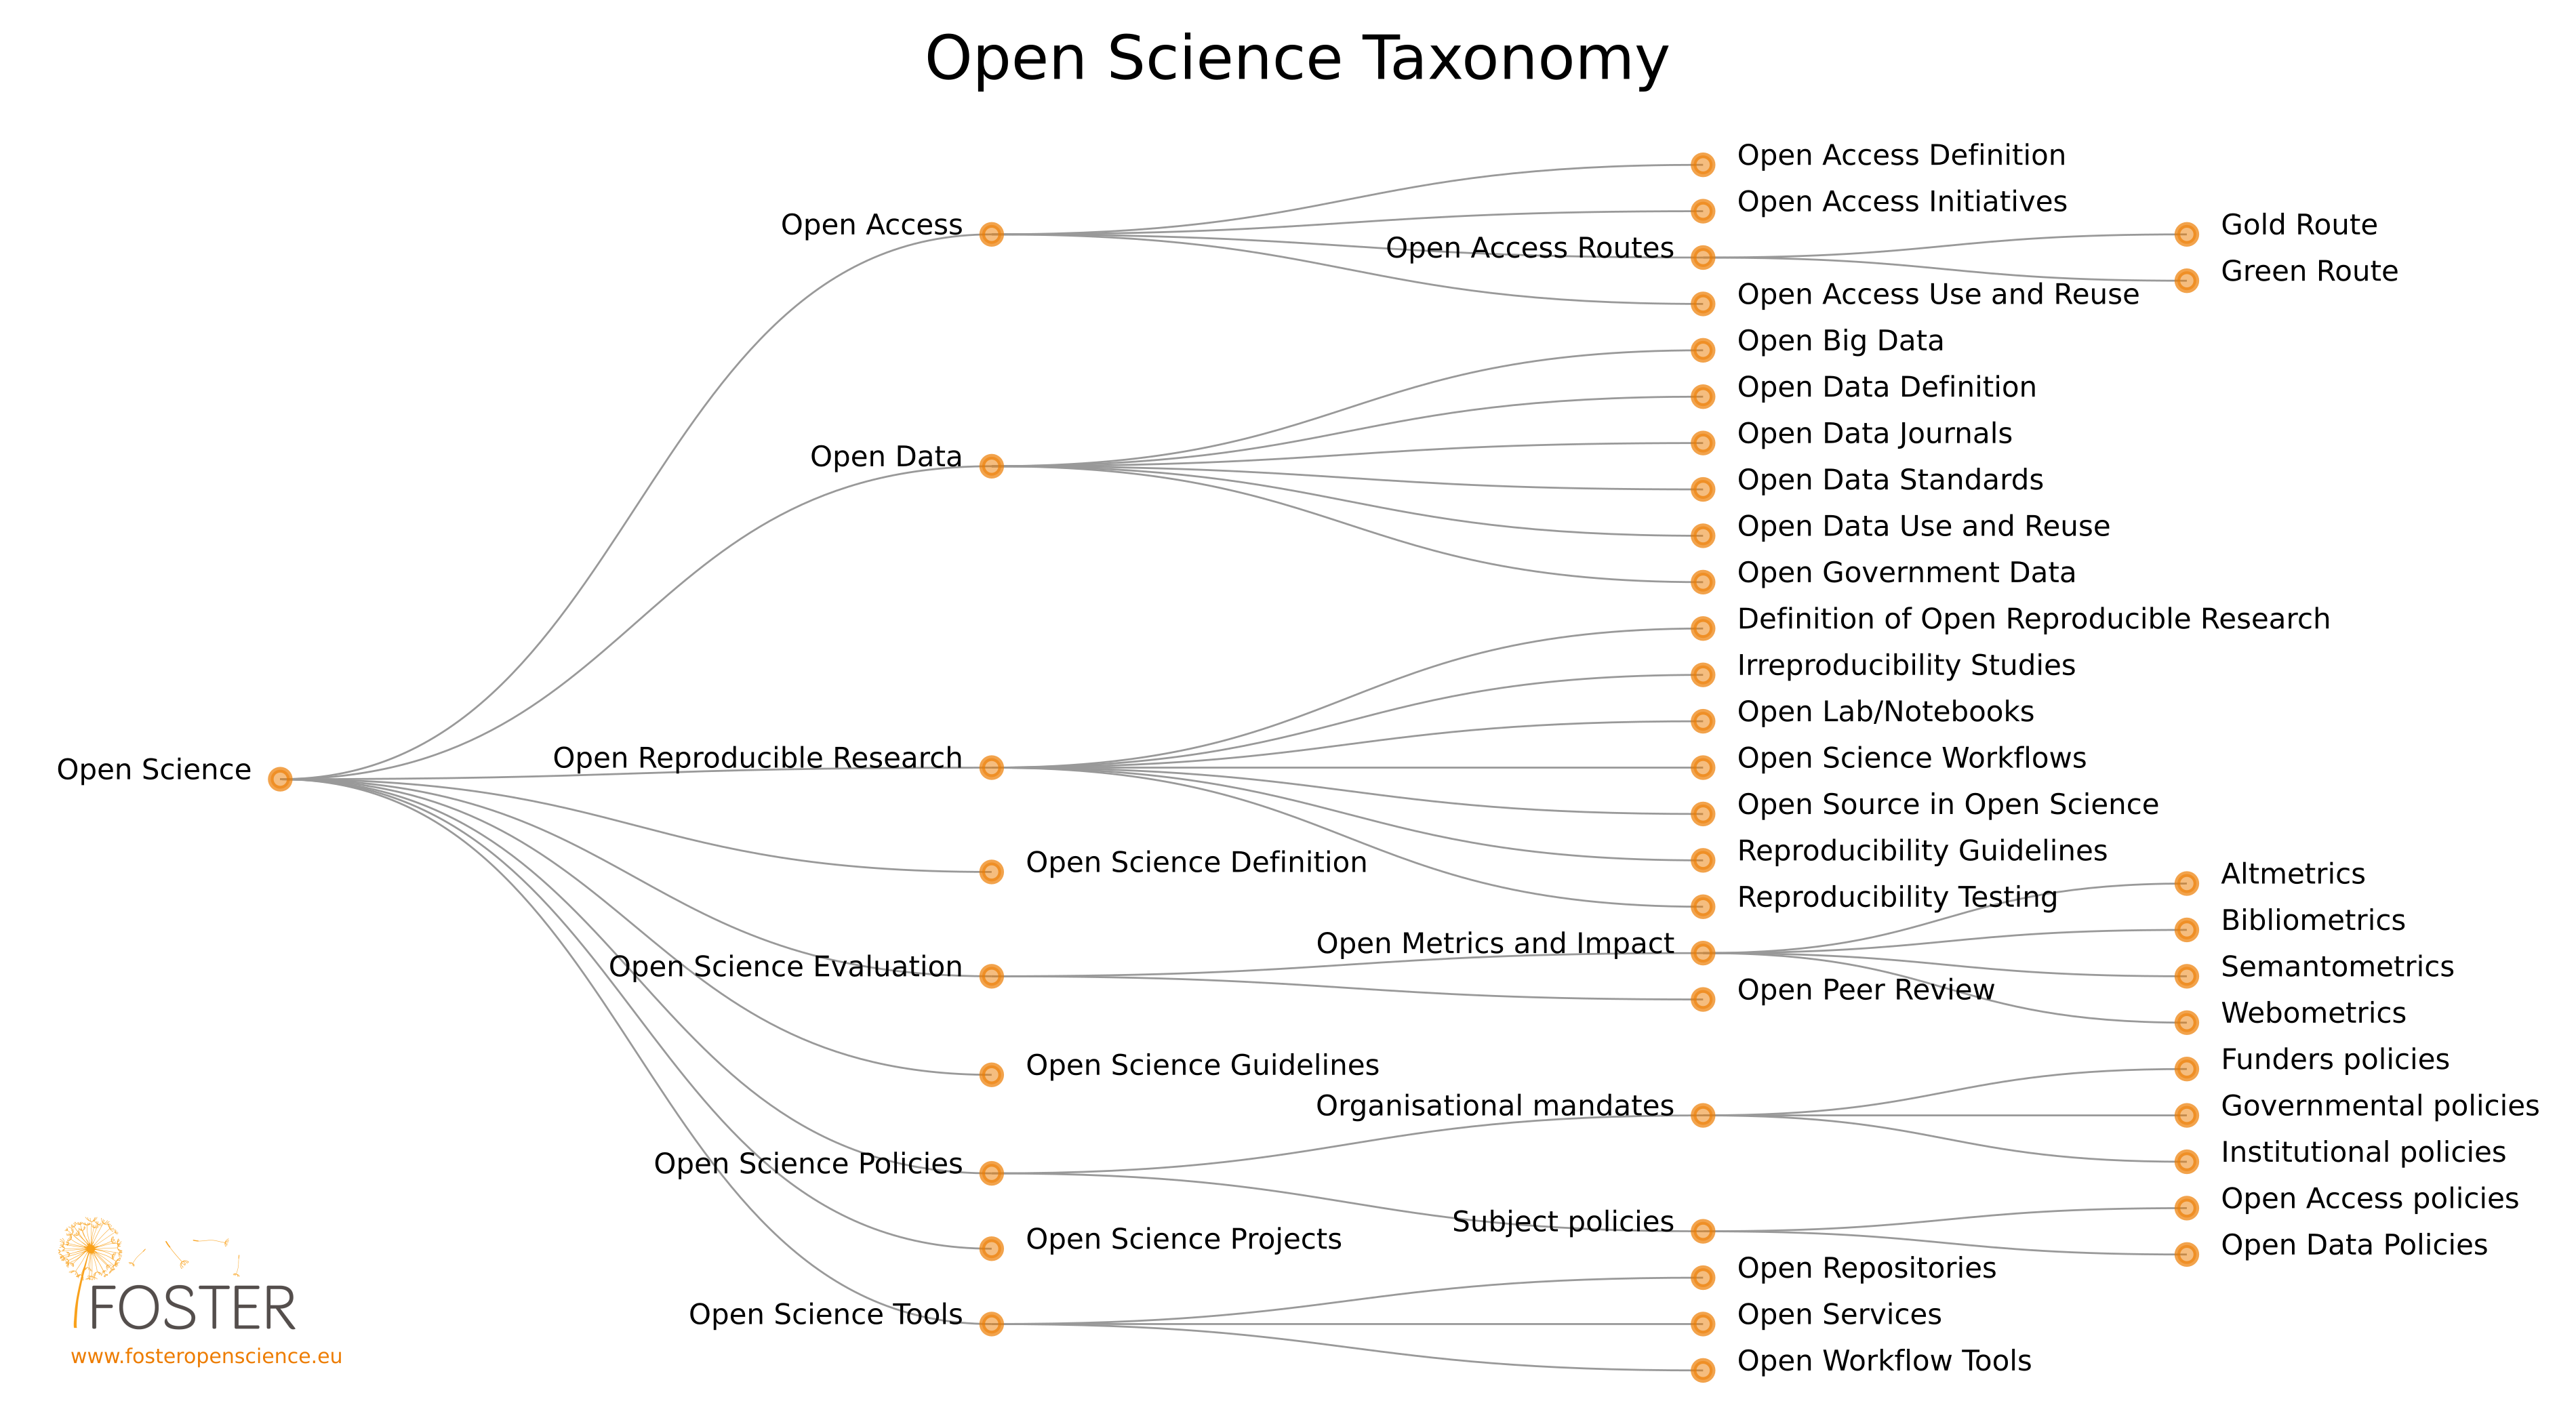 Die Open Science Taxonomy des Foster-Projekts (s. "Fostering Open Science to Research Using a Taxonomy and an eLearning Portal" )